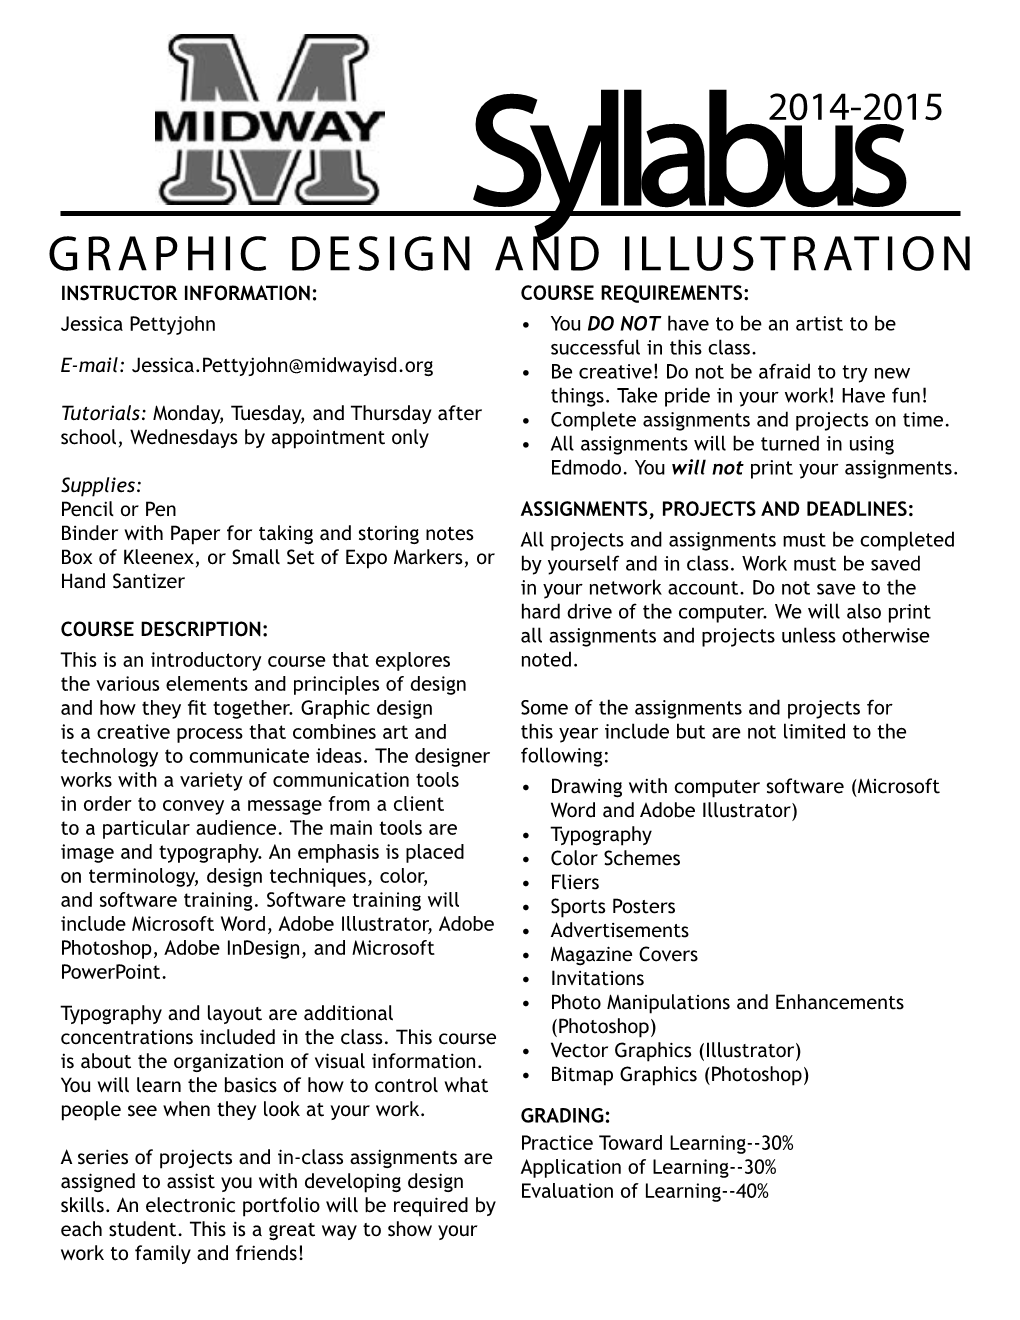 GRAPHIC DESIGN and ILLUSTRATION INSTRUCTOR INFORMATION: COURSE REQUIREMENTS: Jessica Pettyjohn • You DO NOT Have to Be an Artist to Be Successful in This Class